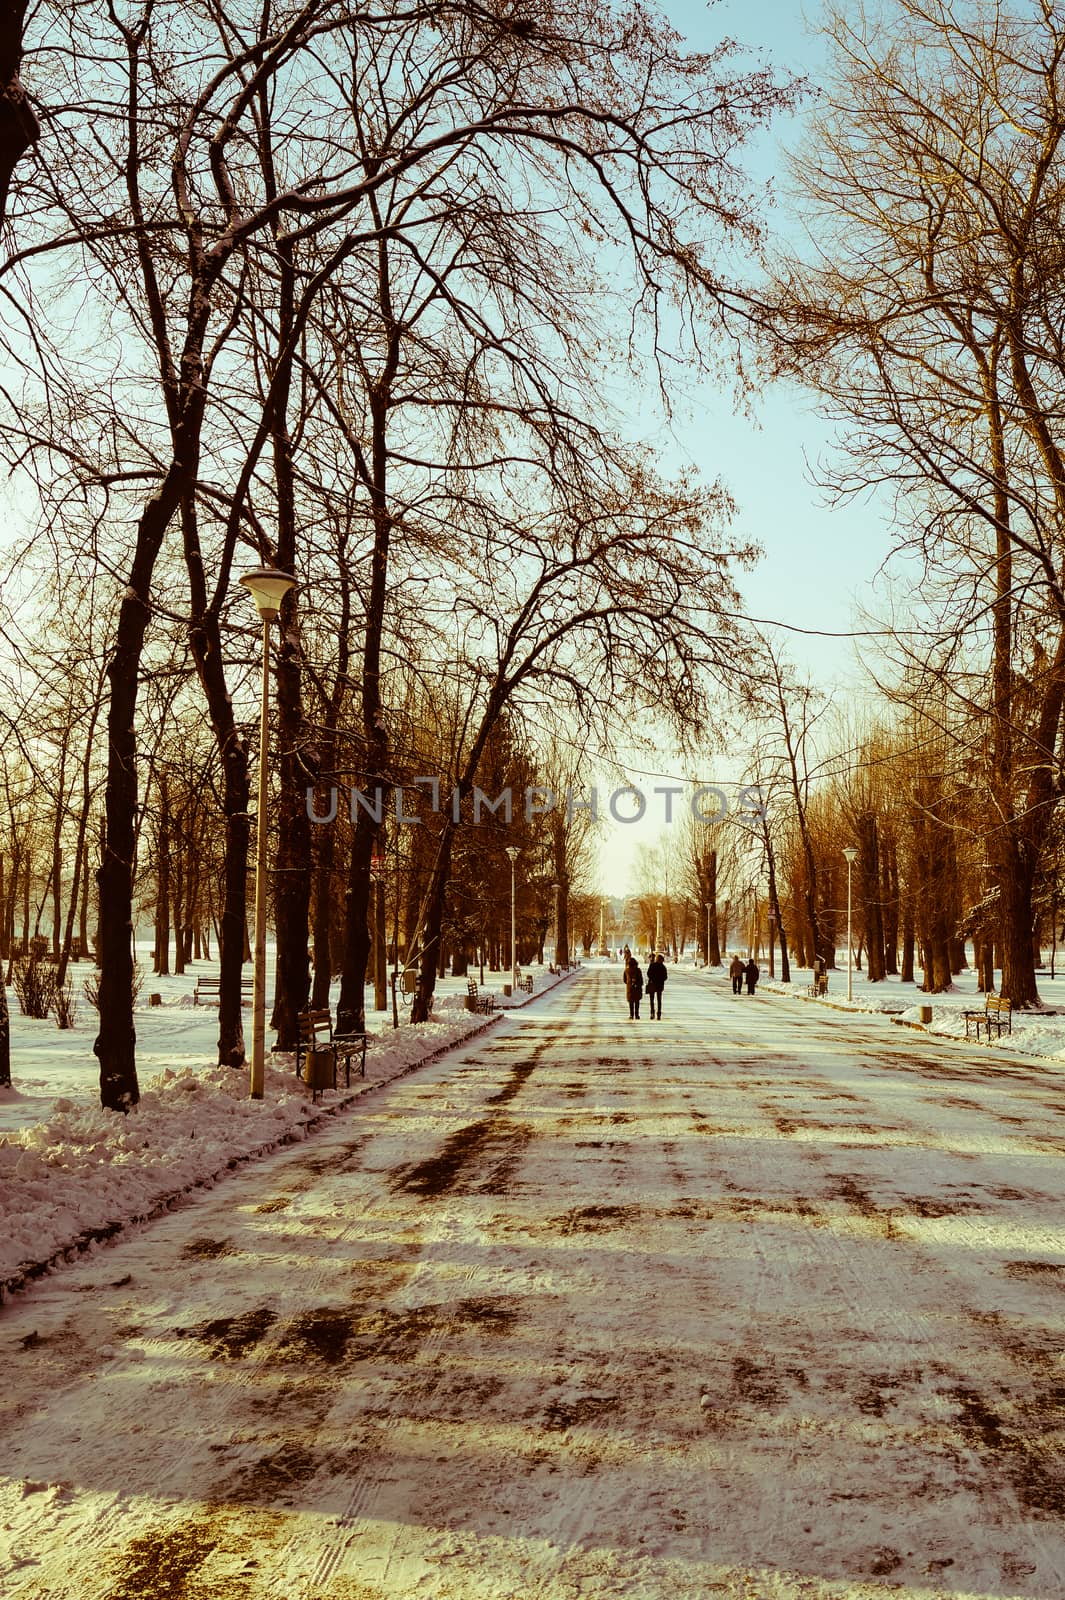 beautiful winter landscape in the Park in the city